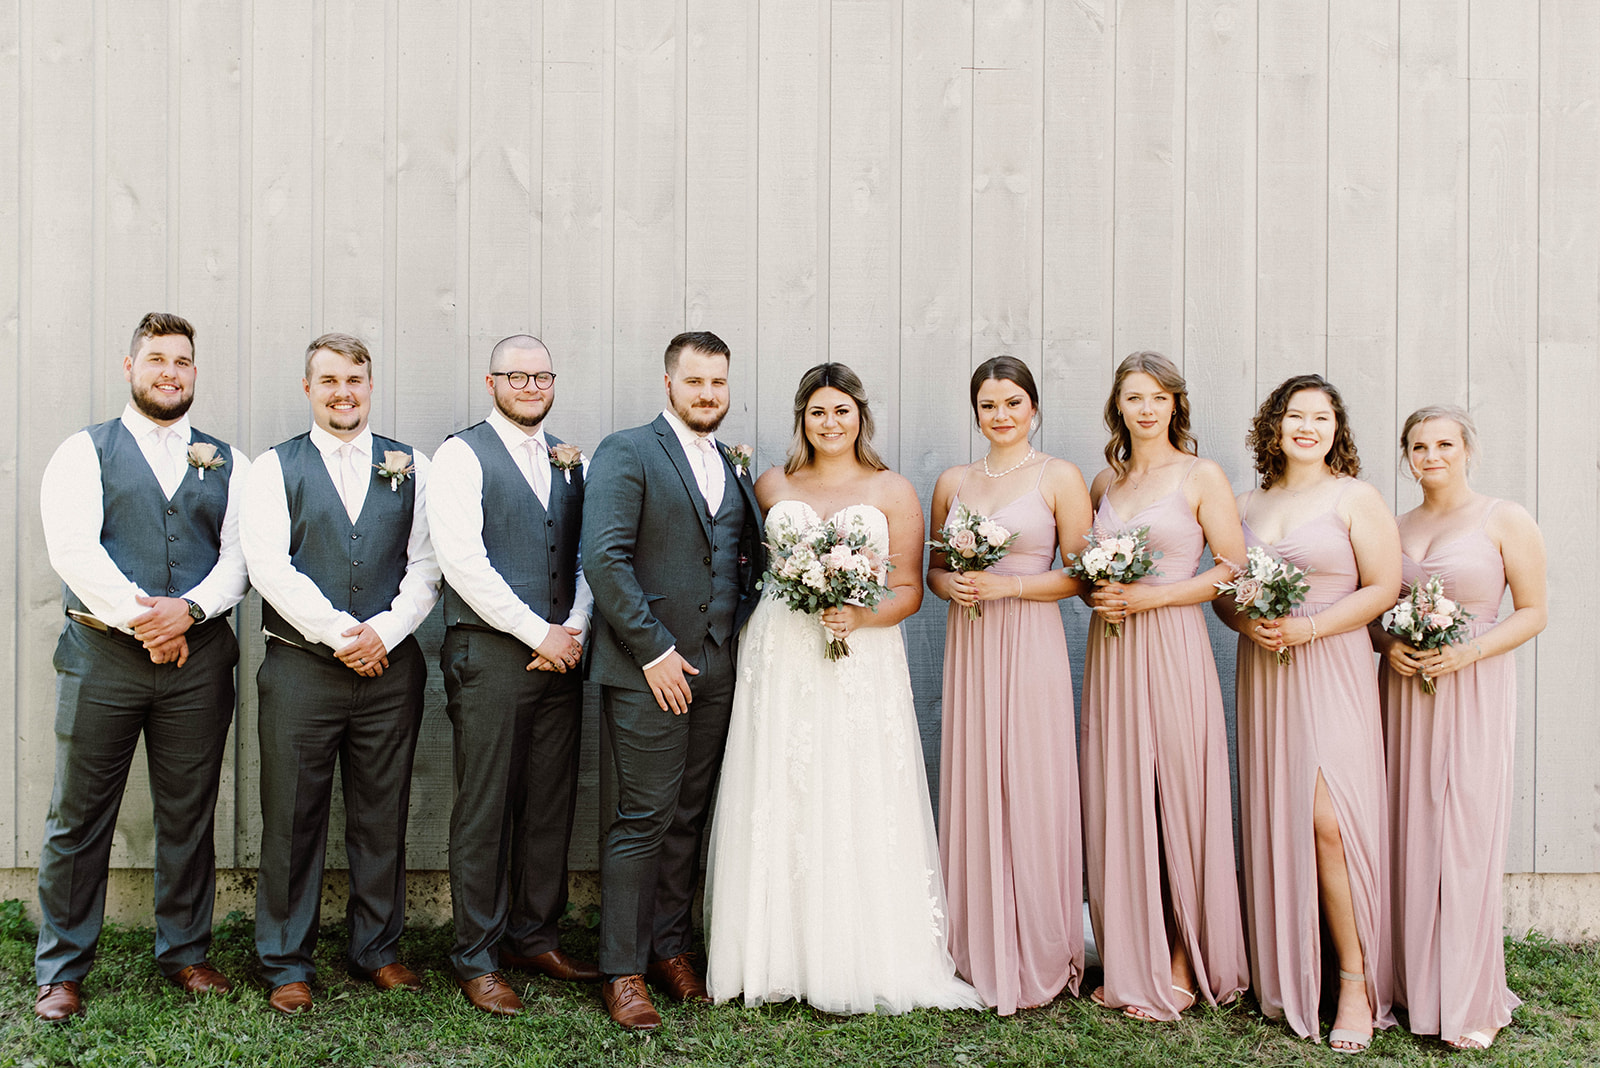 Floral-Reef-Designs-Ottawa-Wedding-and-Event-Florist-At-the-Schoolhouse-Wedding-2020-Rosielle-and-Co-Paige-Jamie-Wedding-316